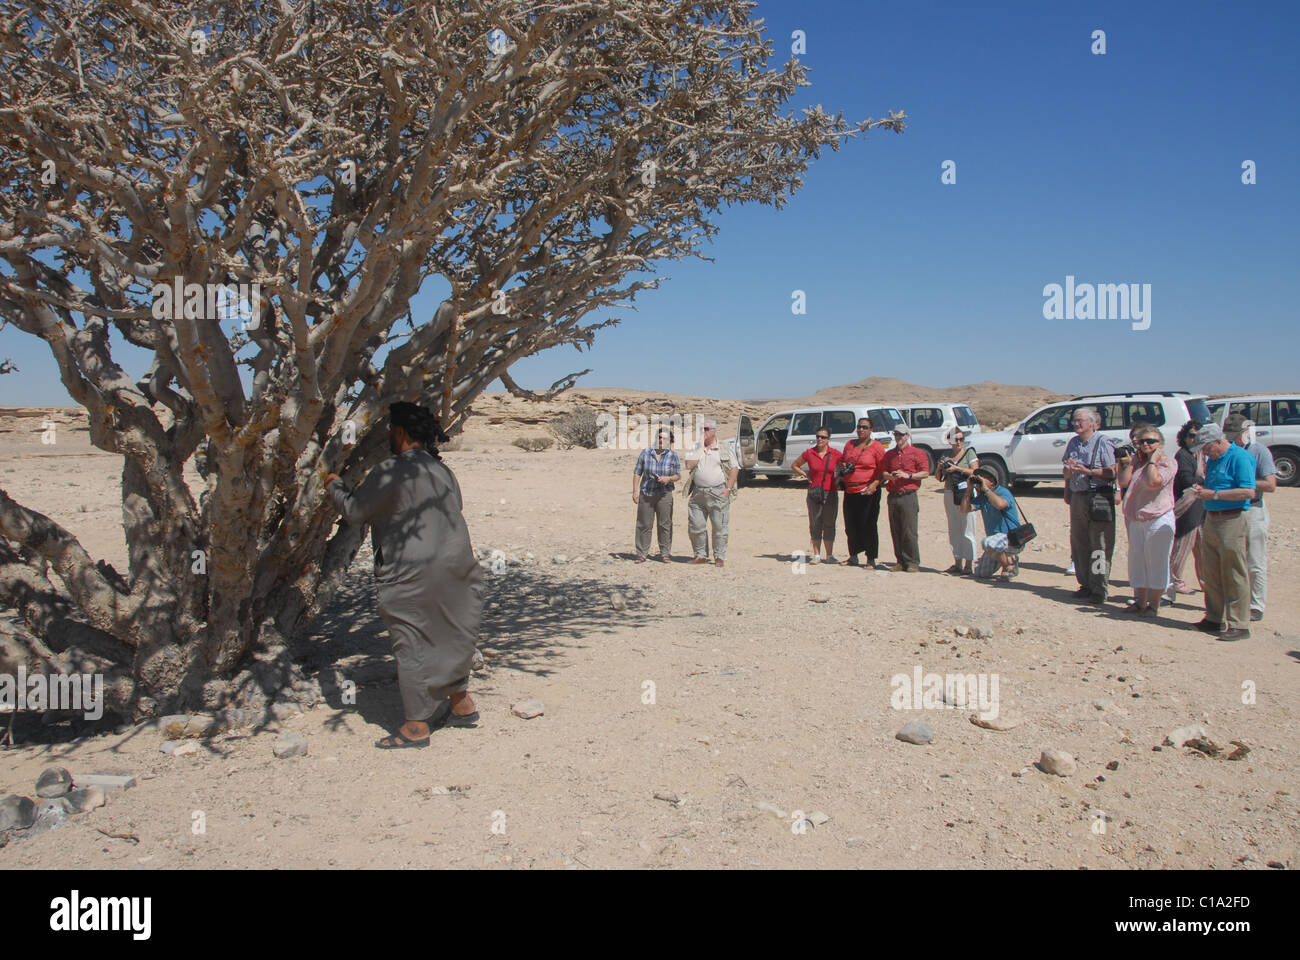 Tourists look at a Frankincense tree in Wadi Dawkah, Southern Oman